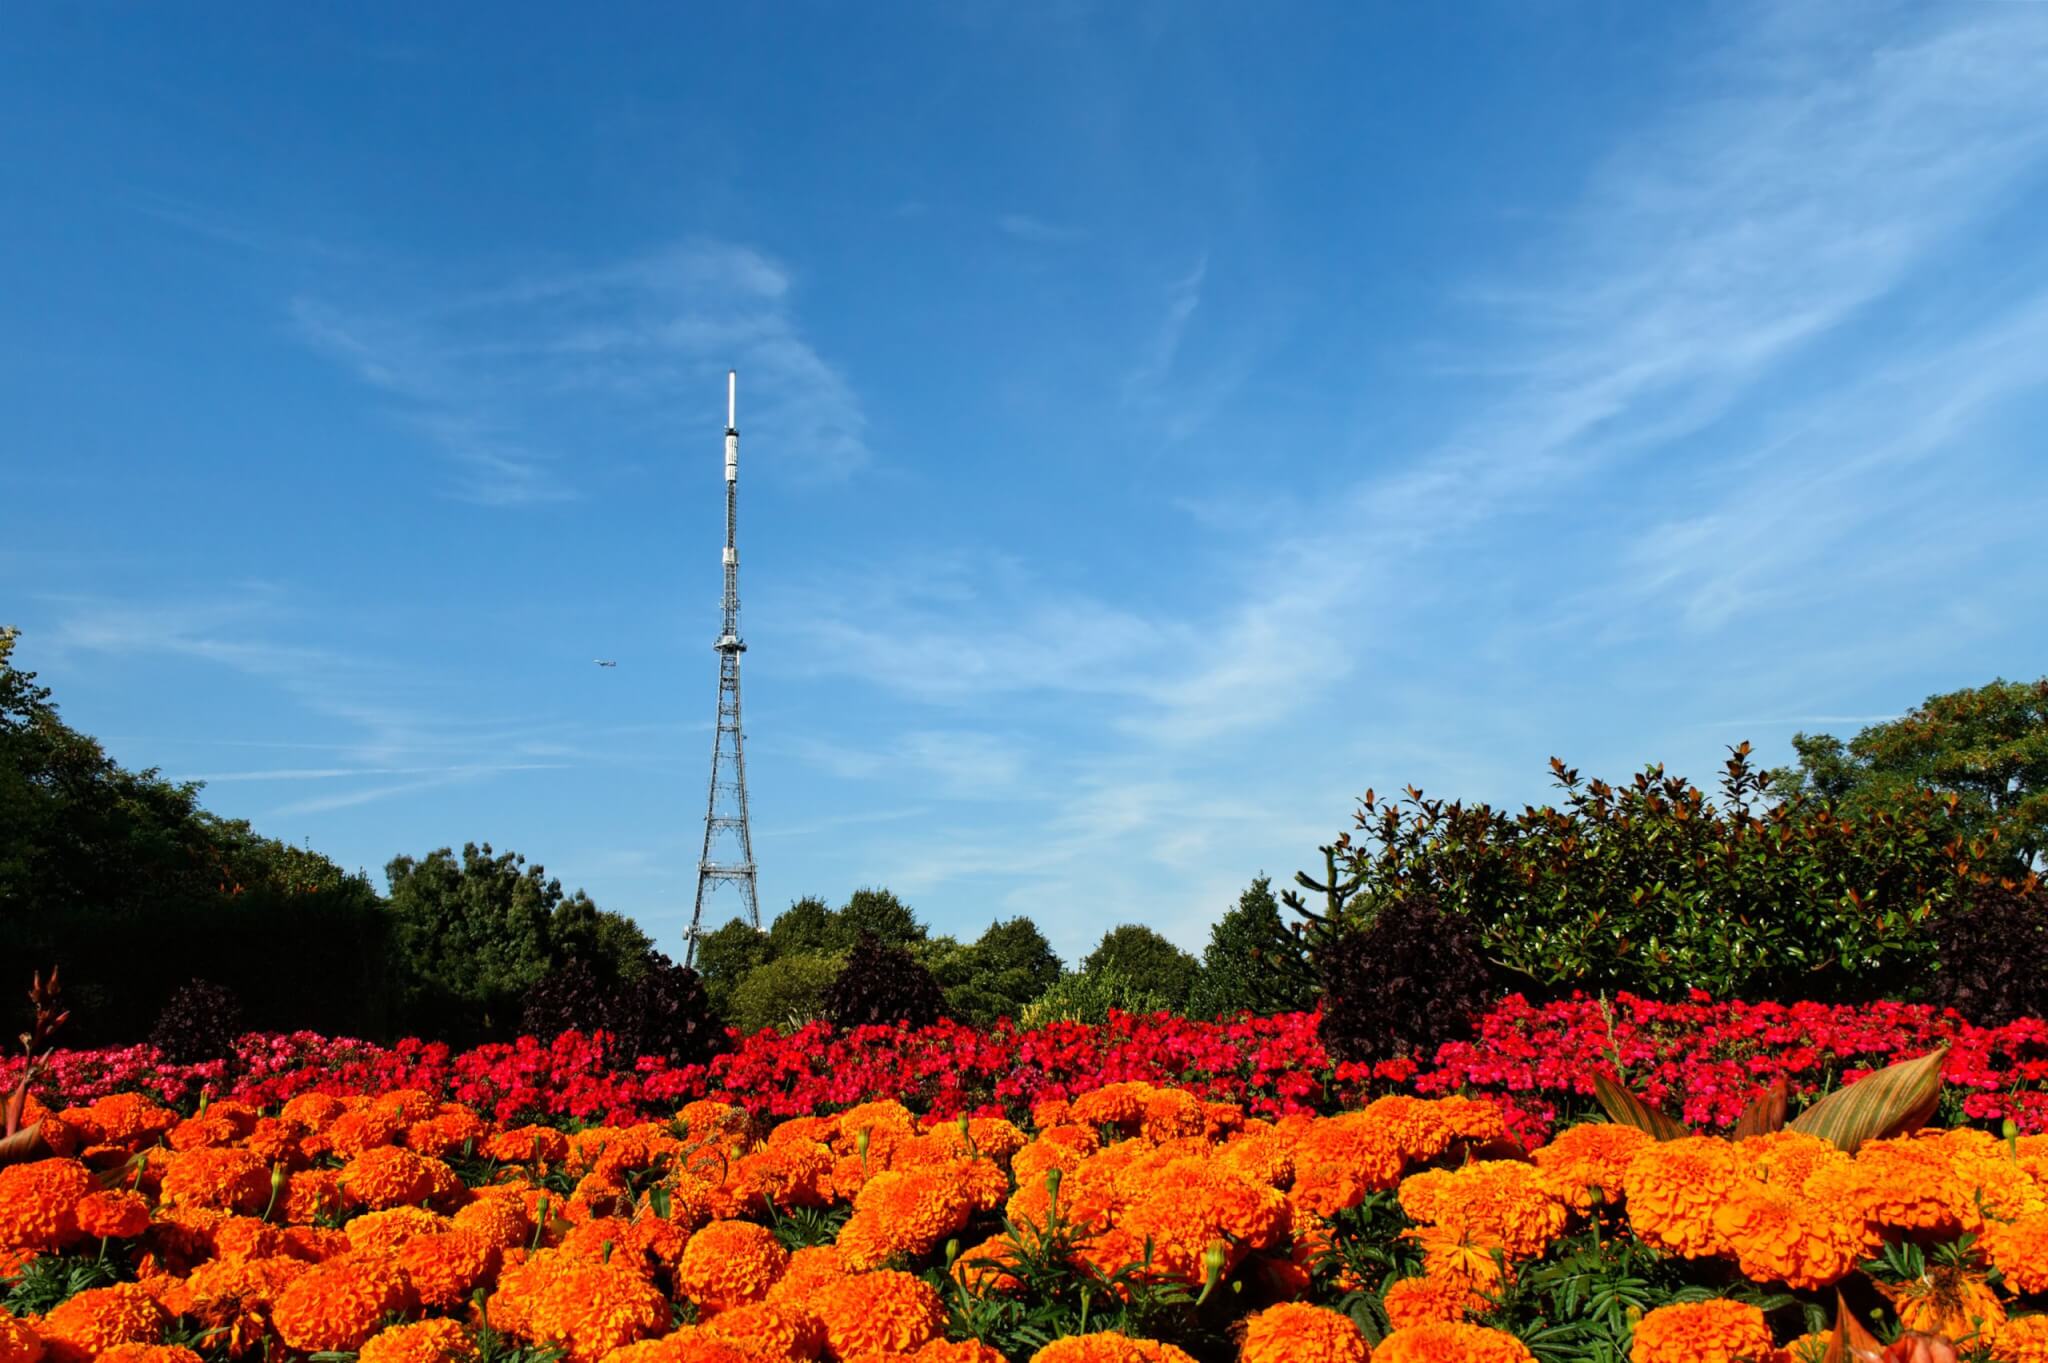 Crystal Palace Mast behind colourful flowerbeds. The mast used to be London's tallest structure - before the building of One Canada Square.